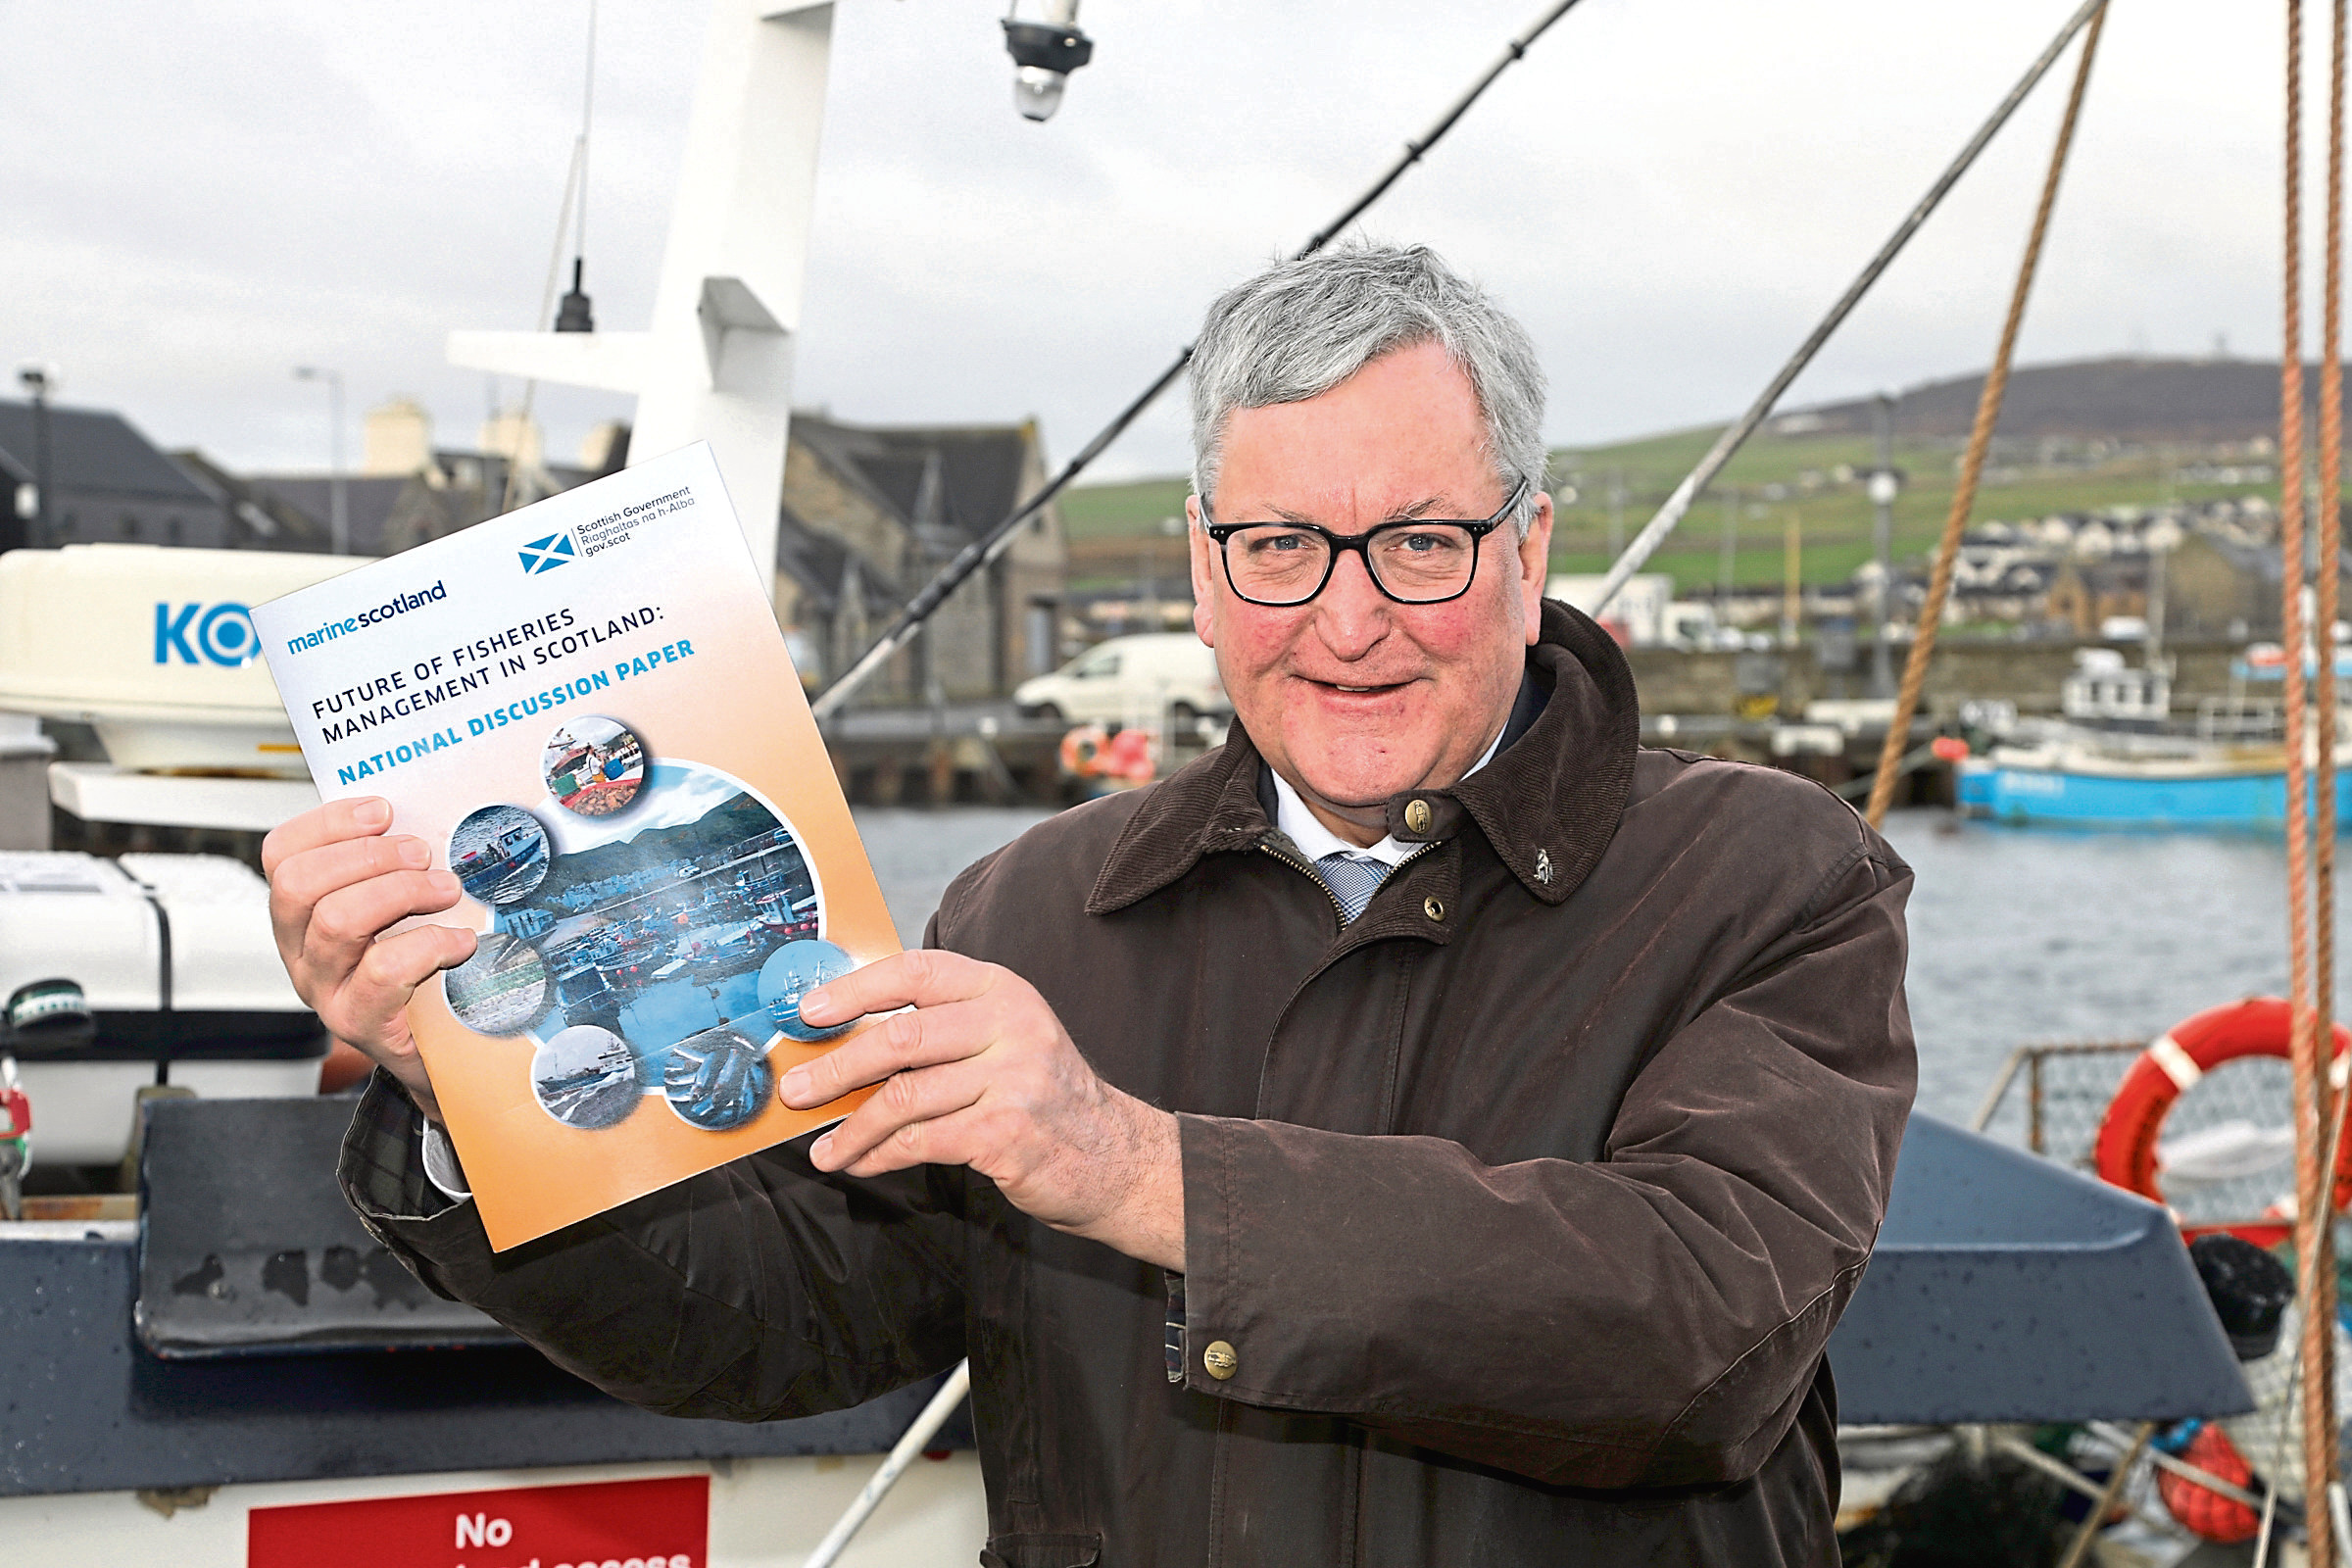 Ken Amer - Fergus Ewing brandishing the Future of Fisheries Management in Scotland paper at Kirkwall Harbour, Orkney